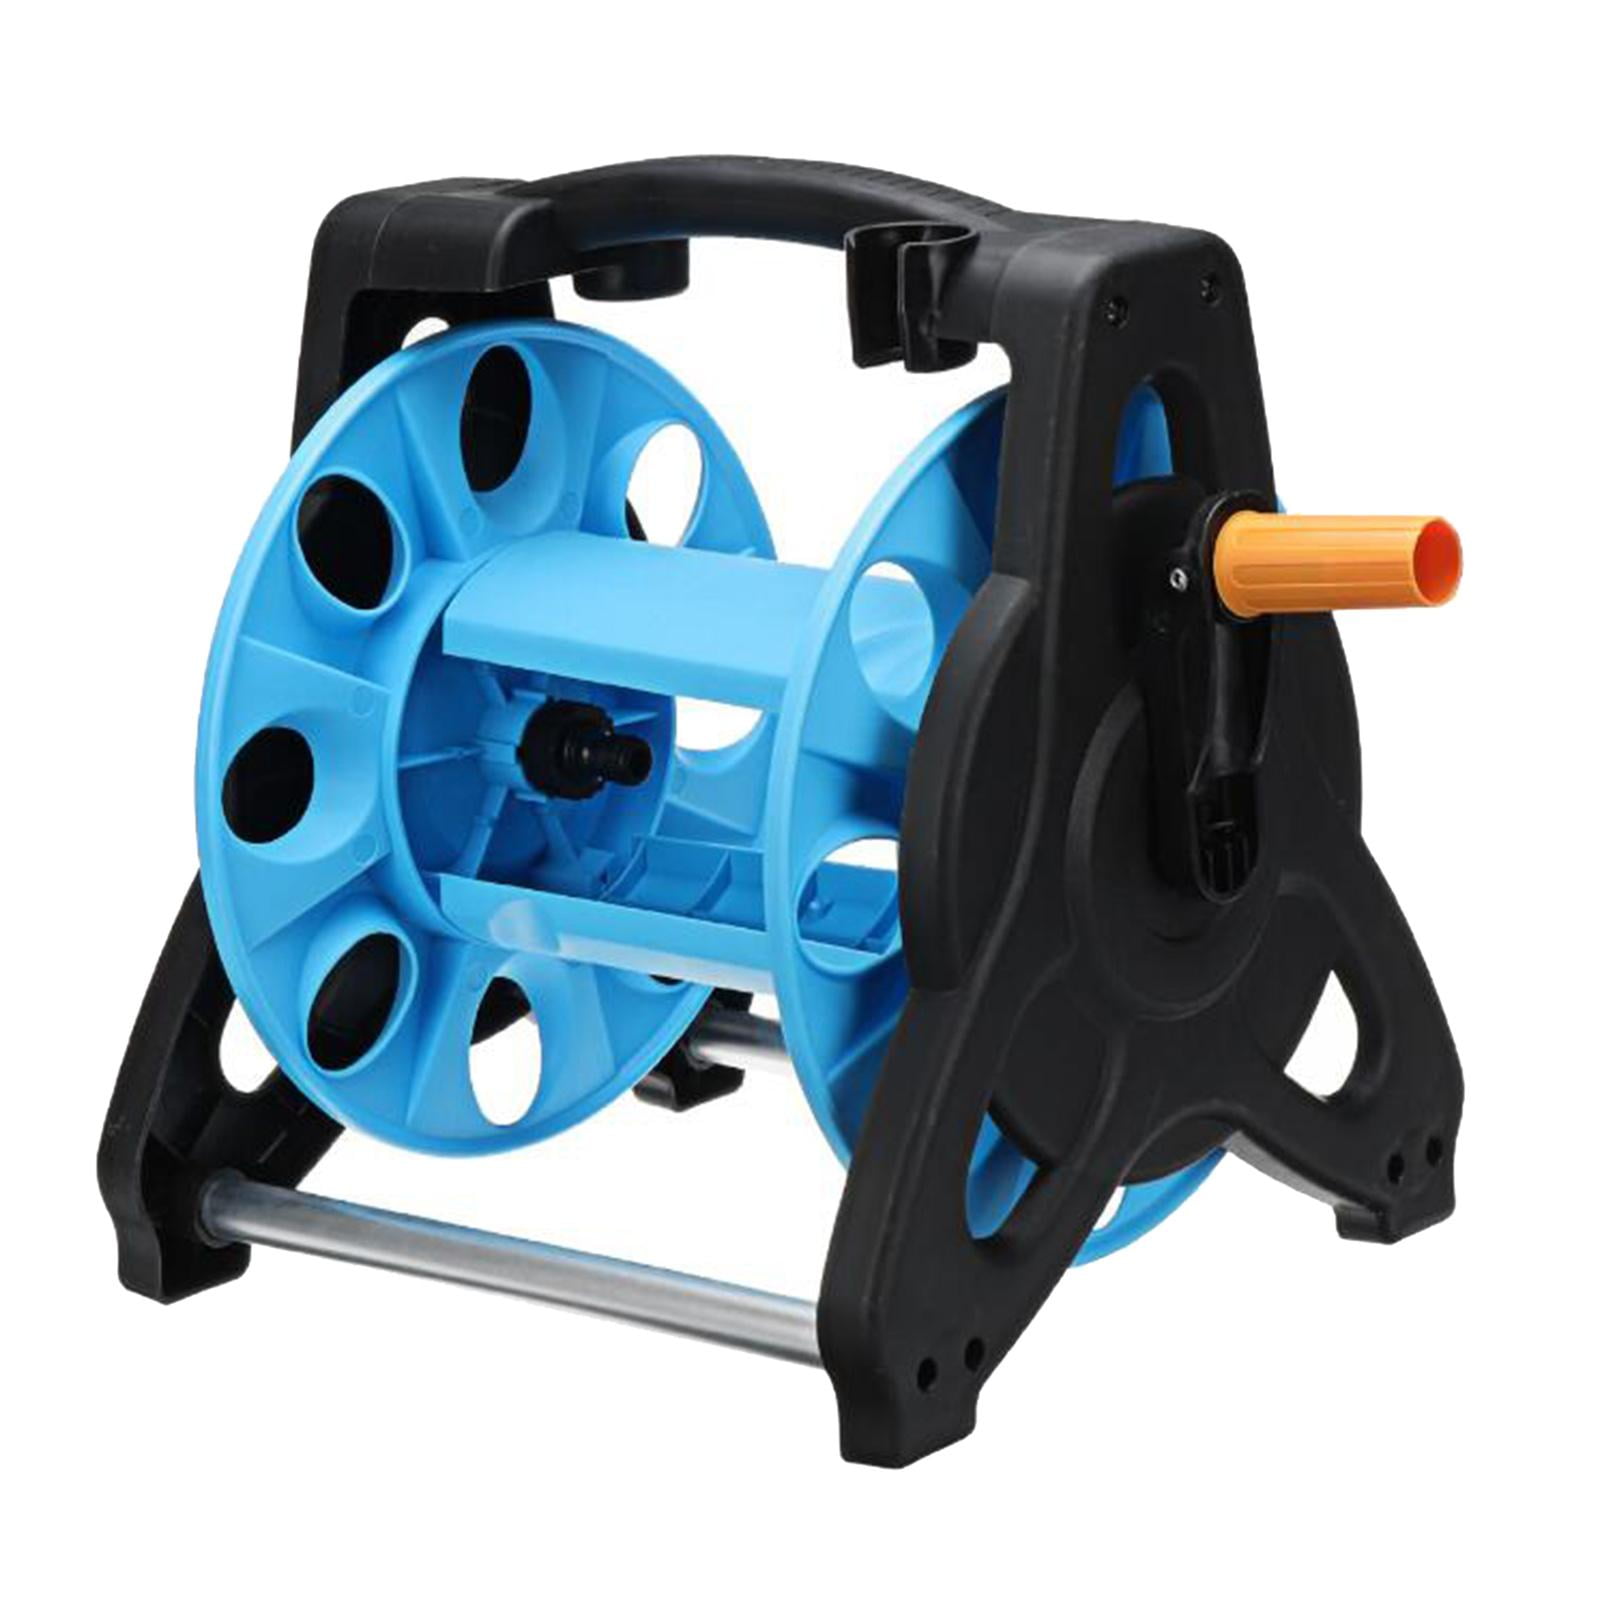 Universal 20M Length Store Hose Reel Cart, Water Pipe Hose Reel, For Water  Pipe Watering Hosepipe Organizer Easy To Collect